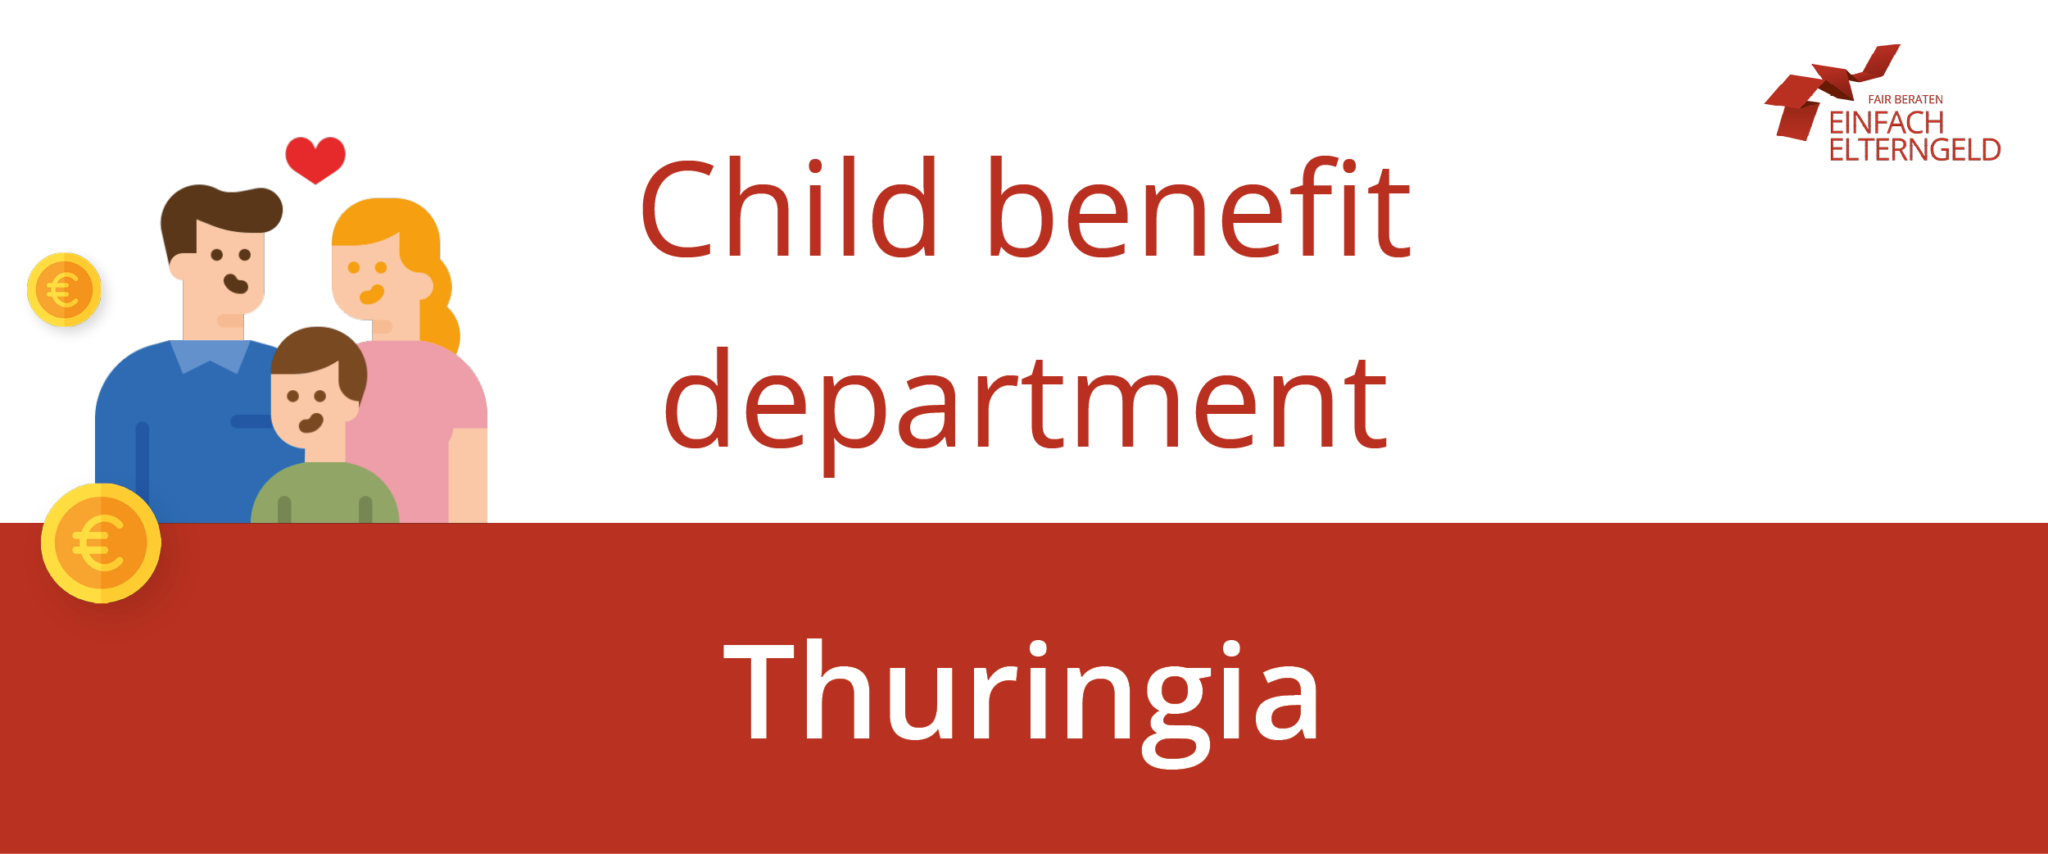 child-benefit-department-thuringia-postal-address-phone-number-e-mail